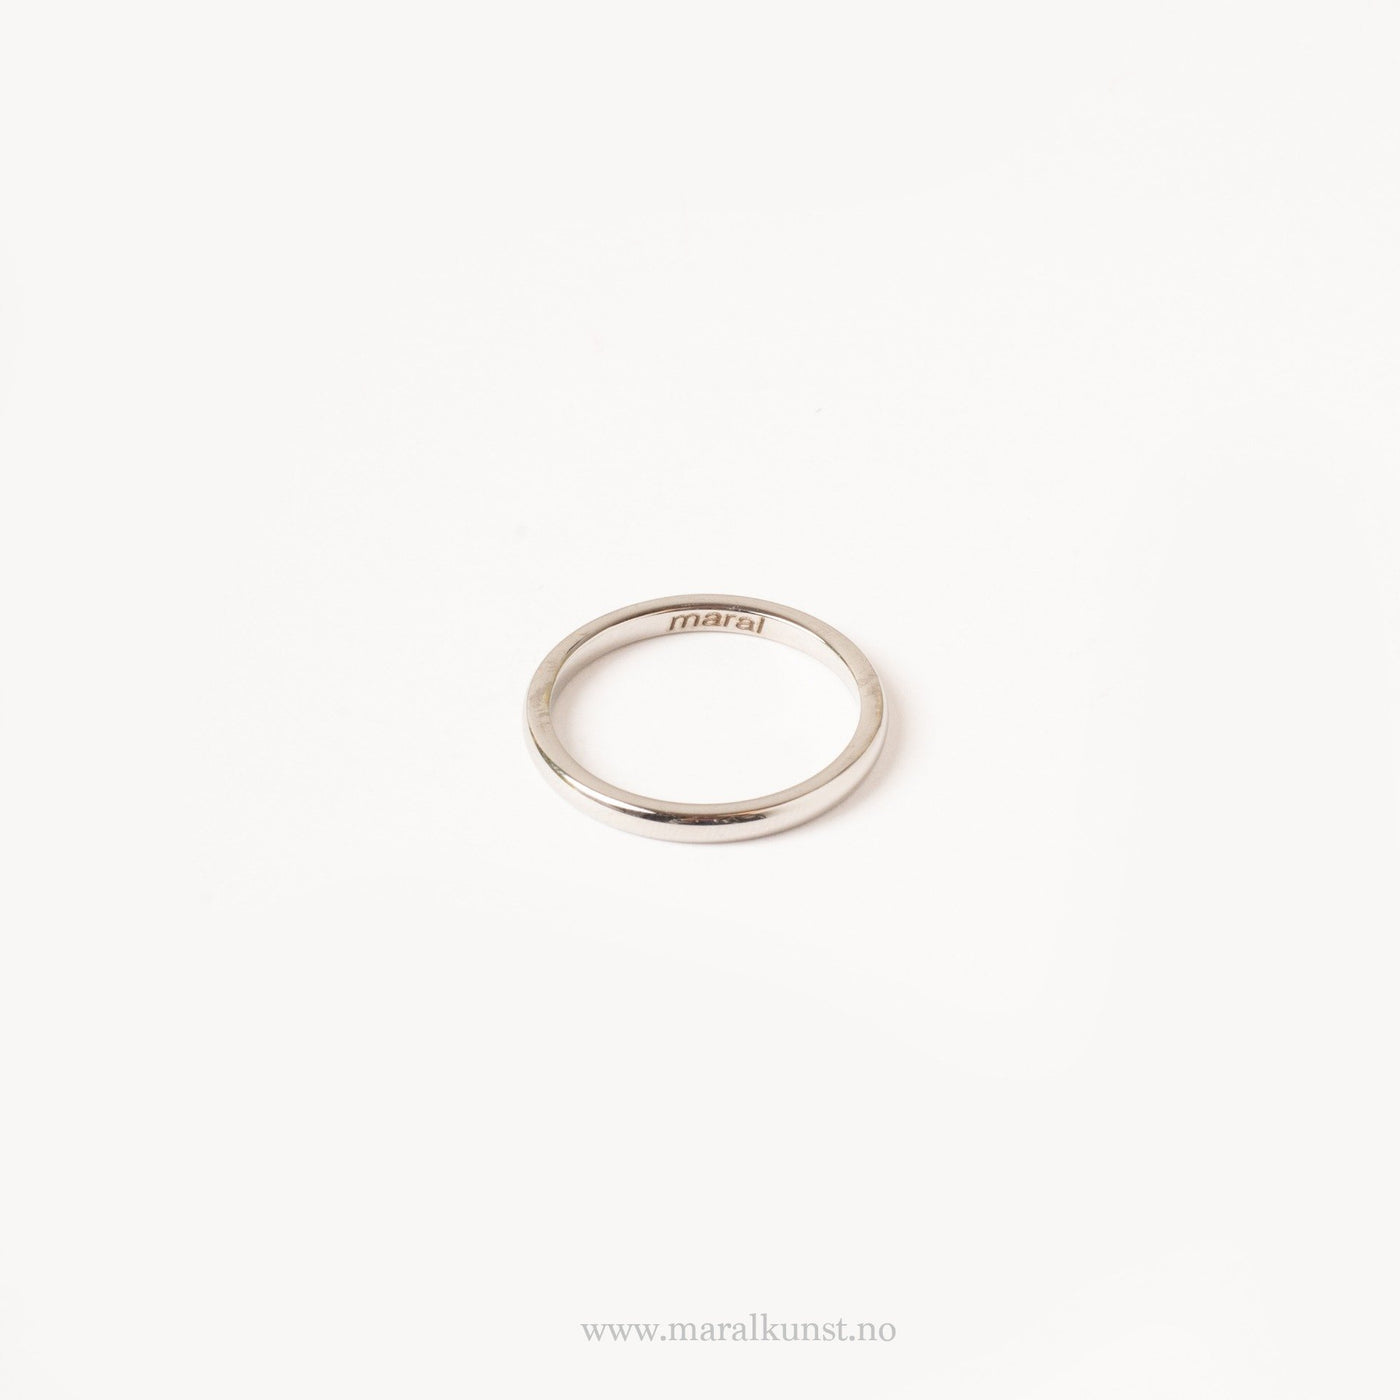 Thin Dome Couple Stack Ring - Maral Kunst Jewelry